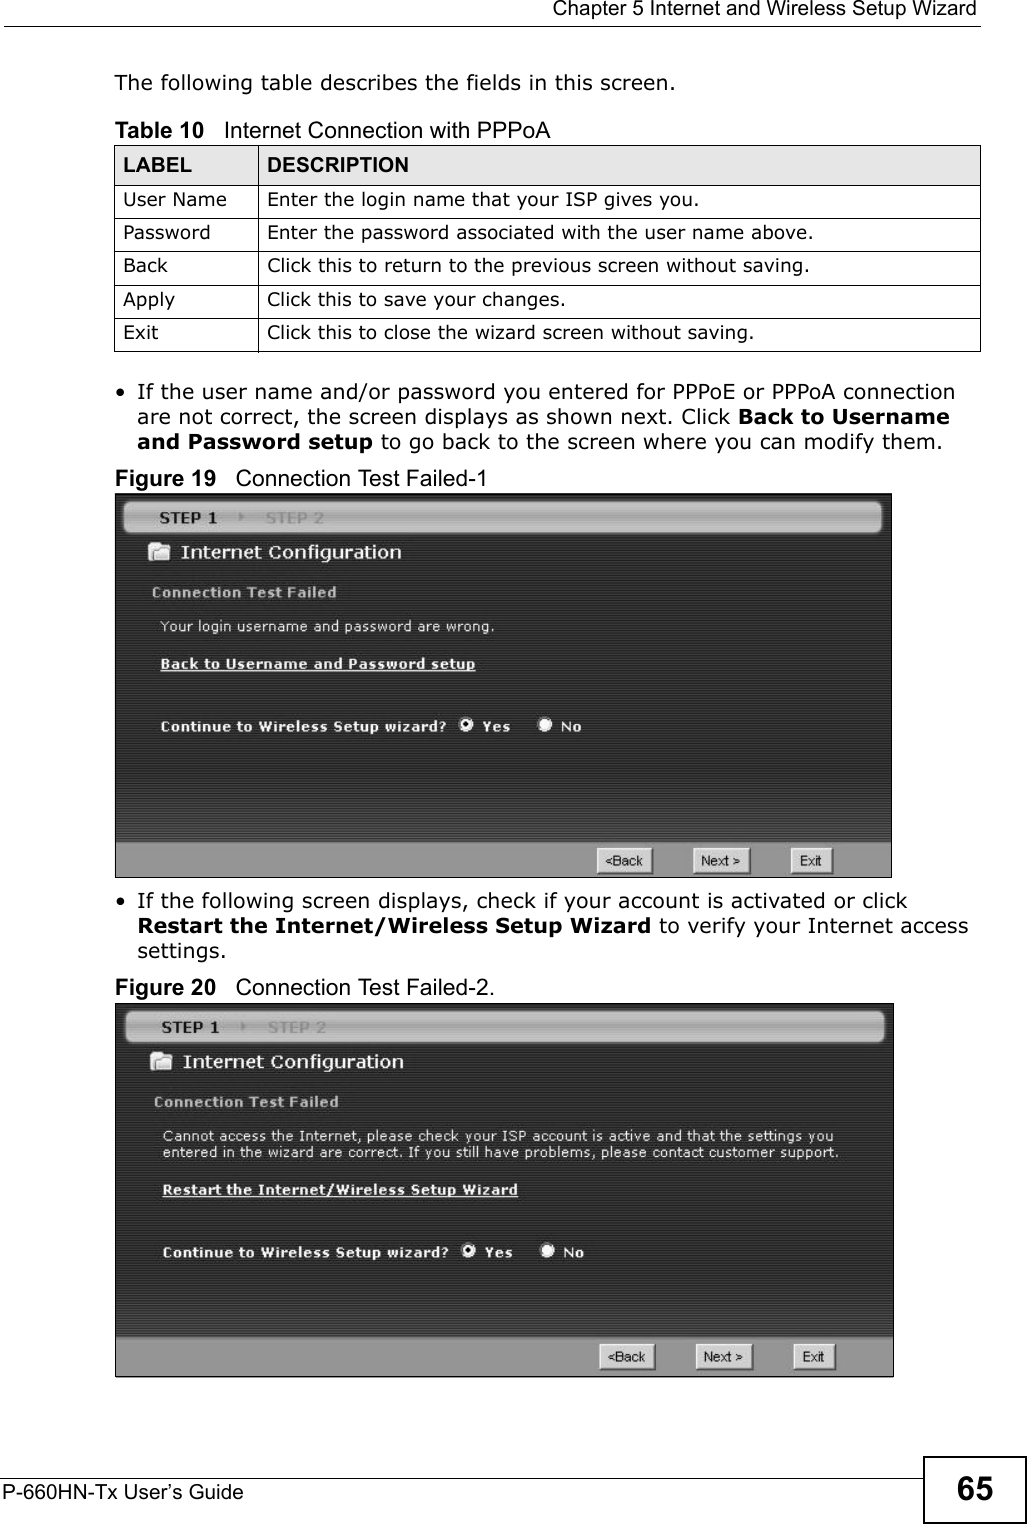  Chapter 5 Internet and Wireless Setup WizardP-660HN-Tx User’s Guide 65The following table describes the fields in this screen.• If the user name and/or password you entered for PPPoE or PPPoA connection are not correct, the screen displays as shown next. Click Back to Username and Password setup to go back to the screen where you can modify them.Figure 19   Connection Test Failed-1• If the following screen displays, check if your account is activated or click Restart the Internet/Wireless Setup Wizard to verify your Internet access settings. Figure 20   Connection Test Failed-2.Table 10   Internet Connection with PPPoALABEL DESCRIPTIONUser Name Enter the login name that your ISP gives you. Password Enter the password associated with the user name above.Back Click this to return to the previous screen without saving.Apply Click this to save your changes.Exit Click this to close the wizard screen without saving.